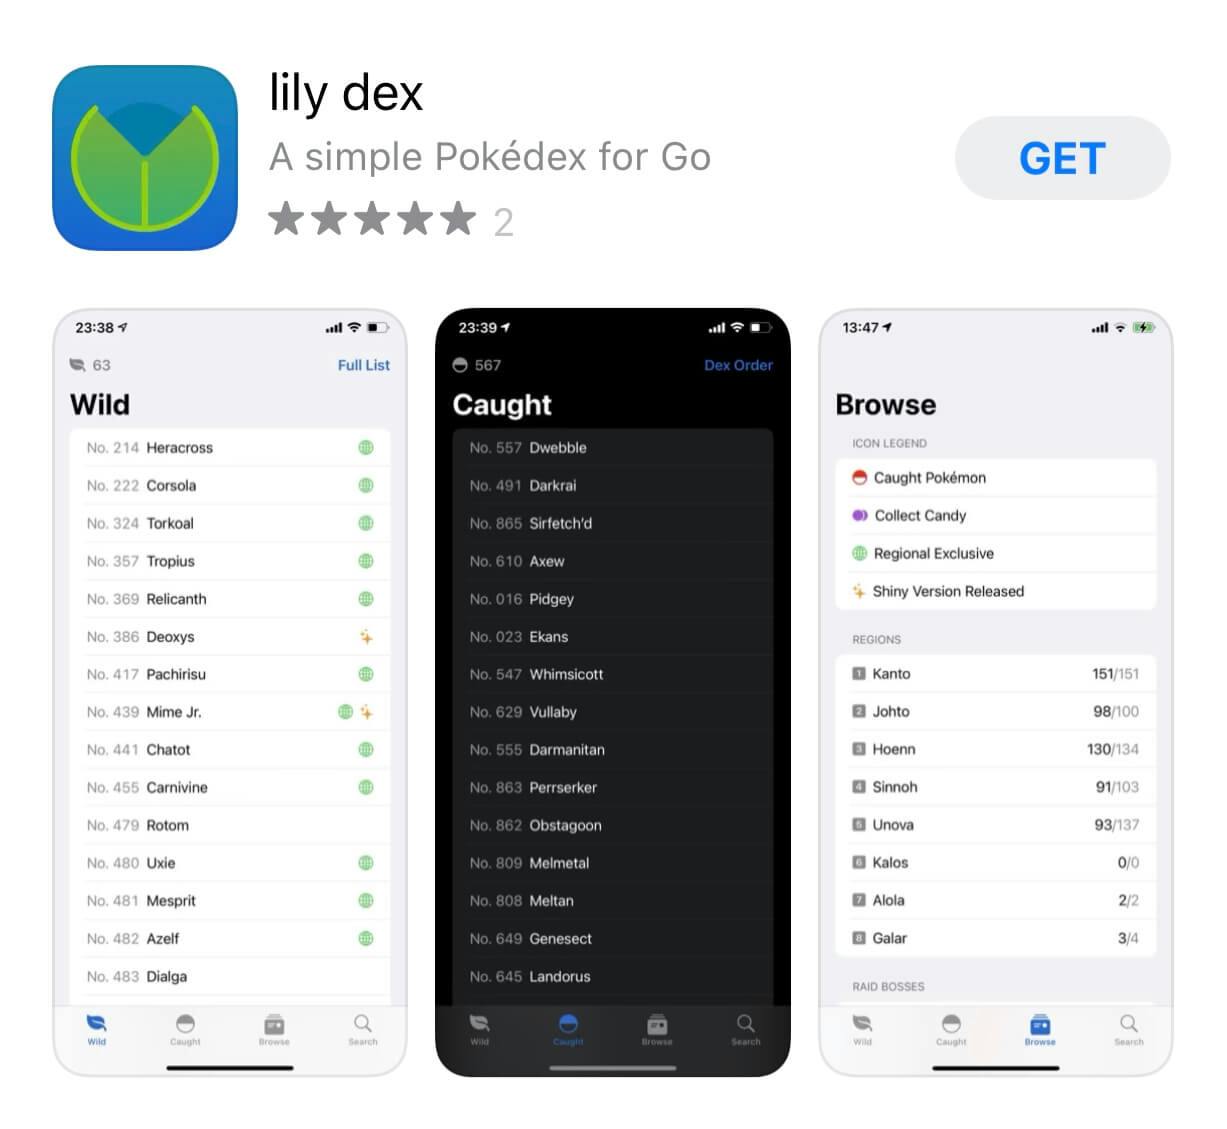 lily dex in the App Store